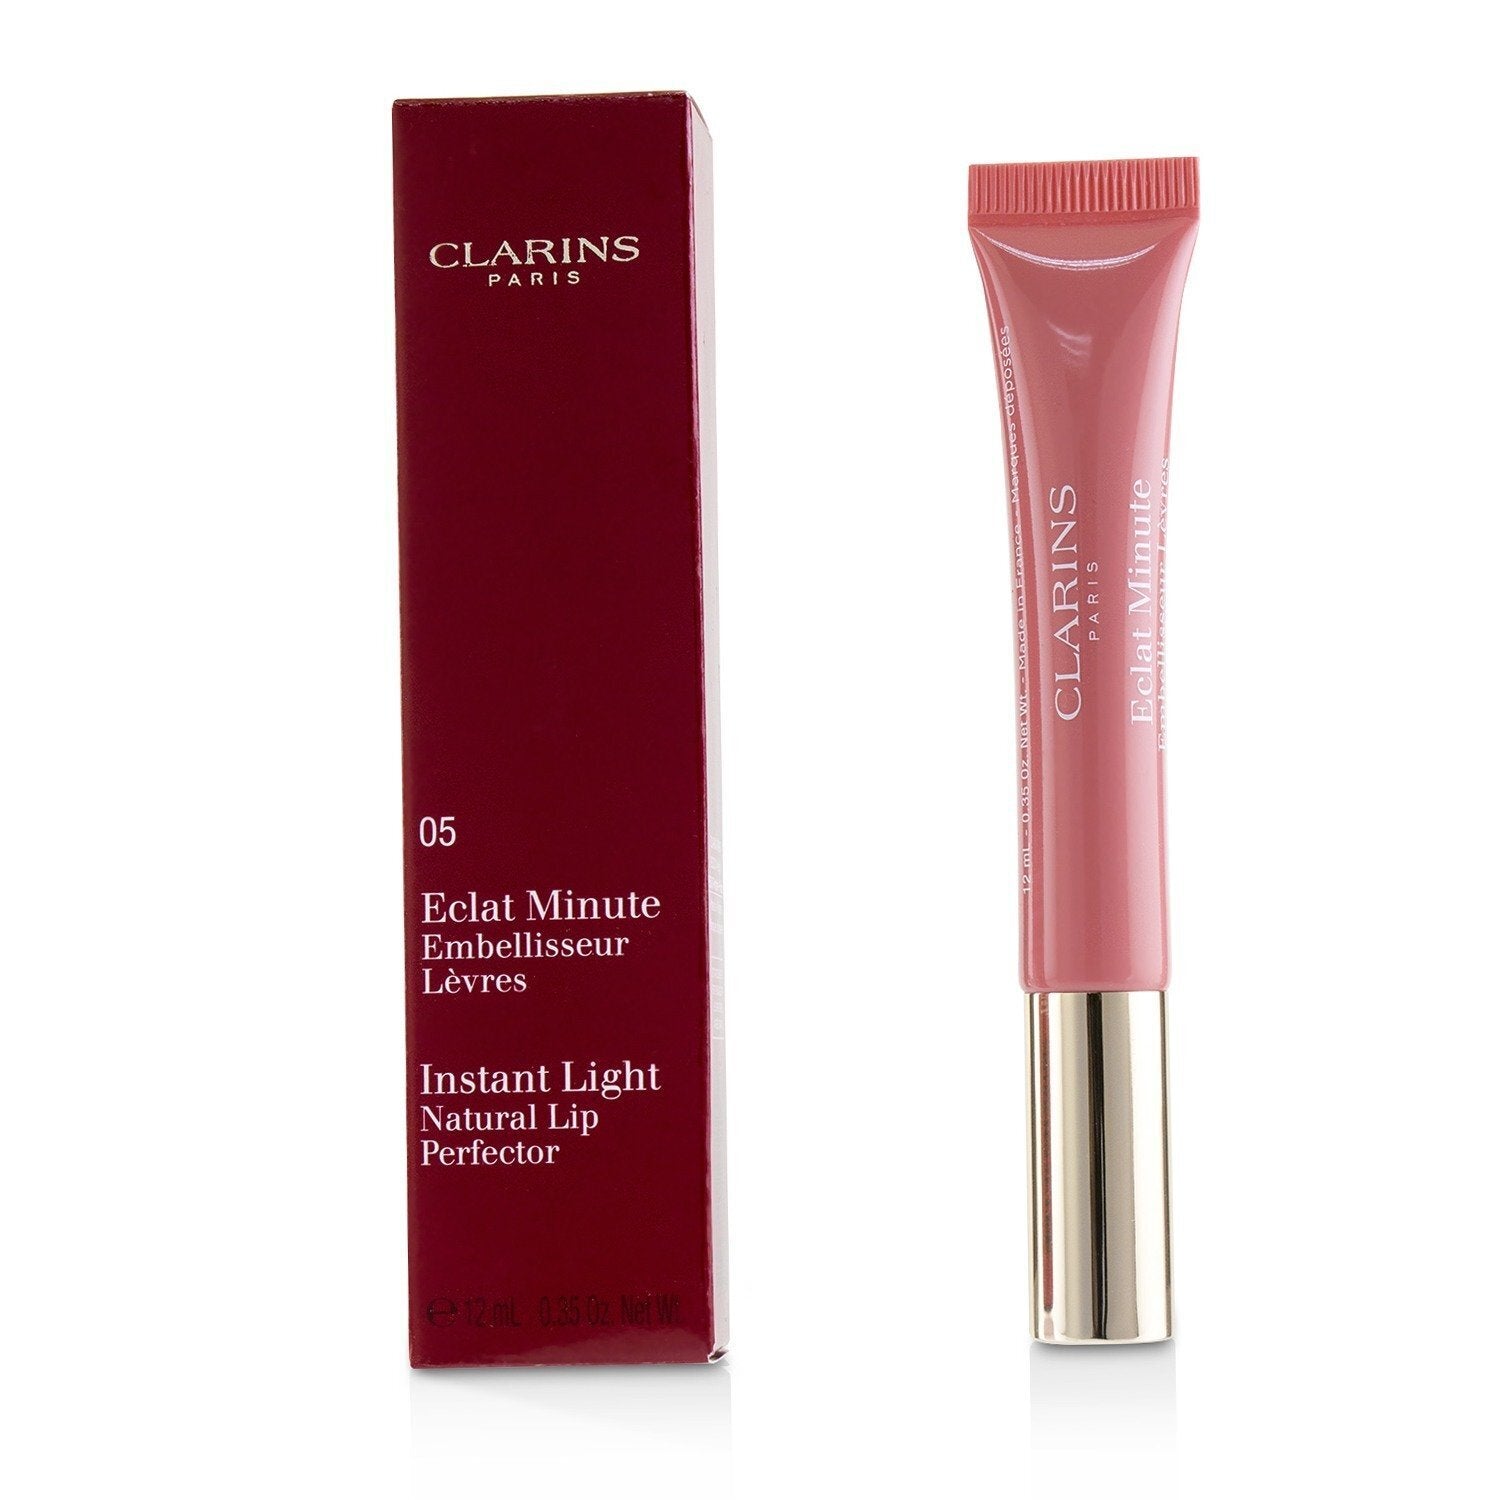 amme Kollega Undvigende Eclat Minute Instant Light Natural Lip Perfector for Sale | Clarins, Make  Up, Buy Now – Author